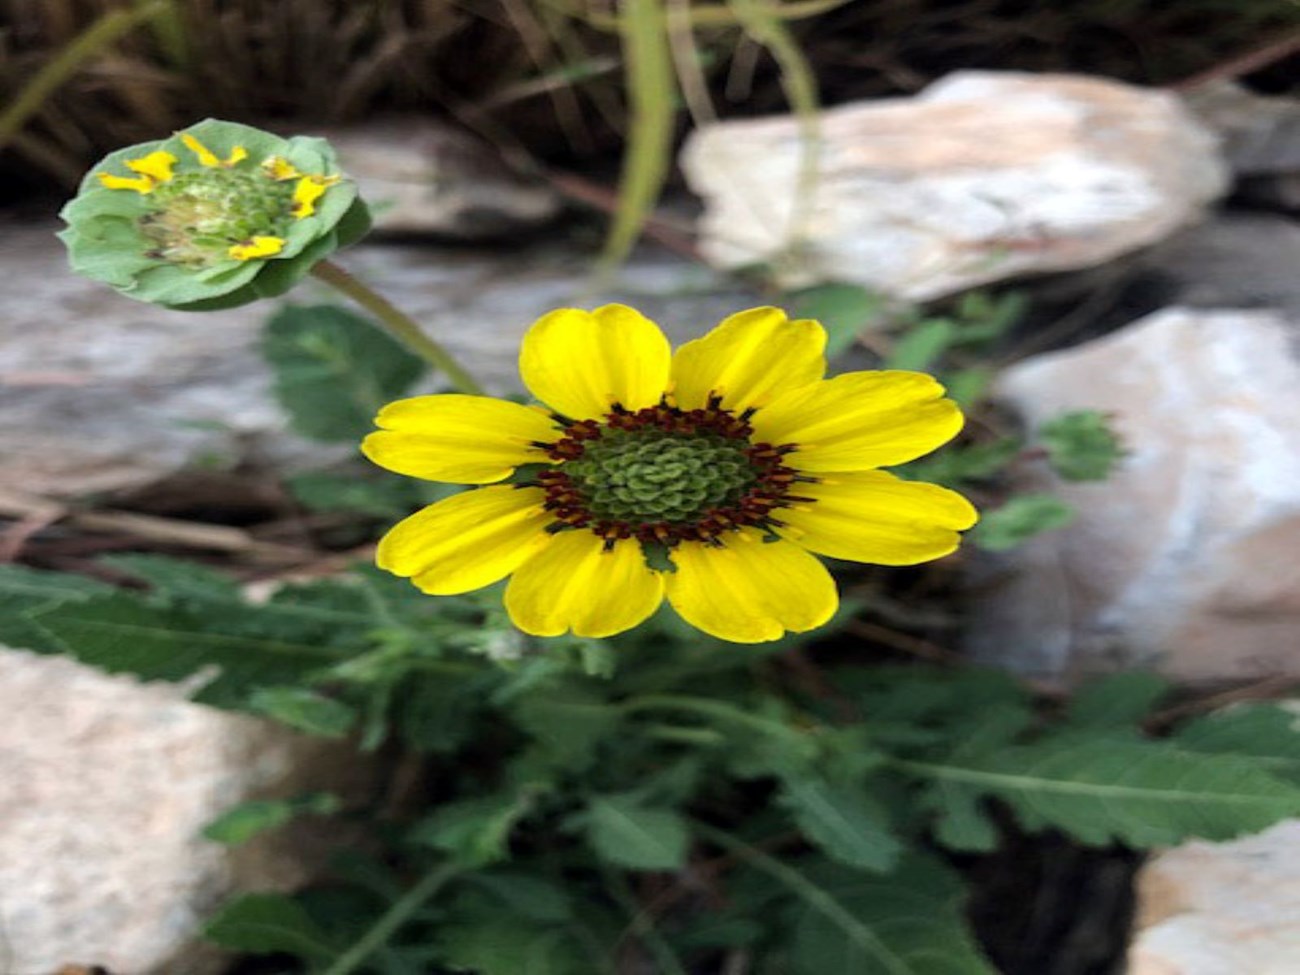 A yellow chocolate flower with a brown center in the garden.